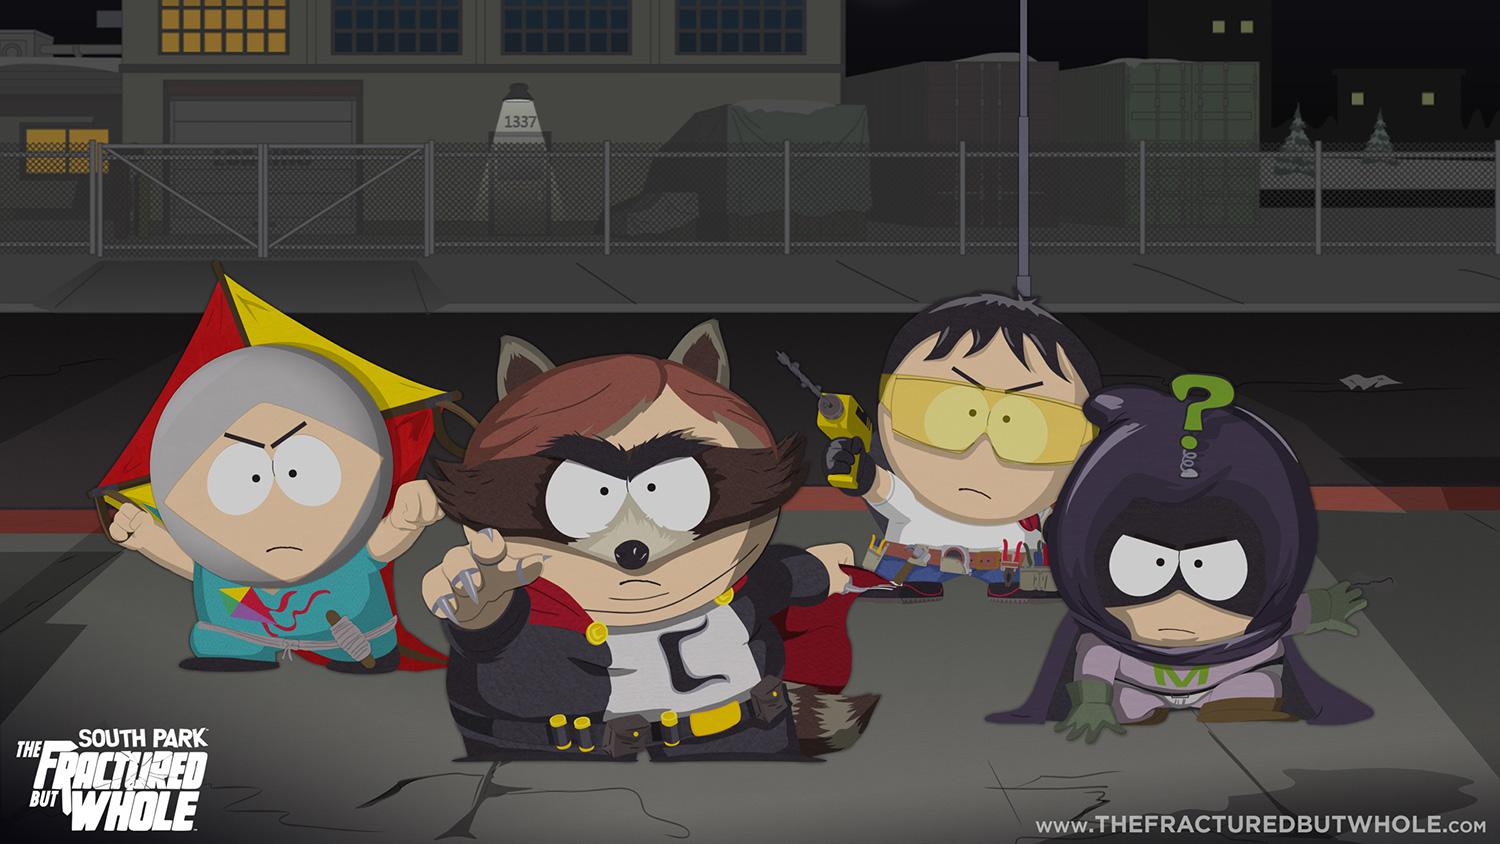 South Park Fractured but Whole screenshot 11